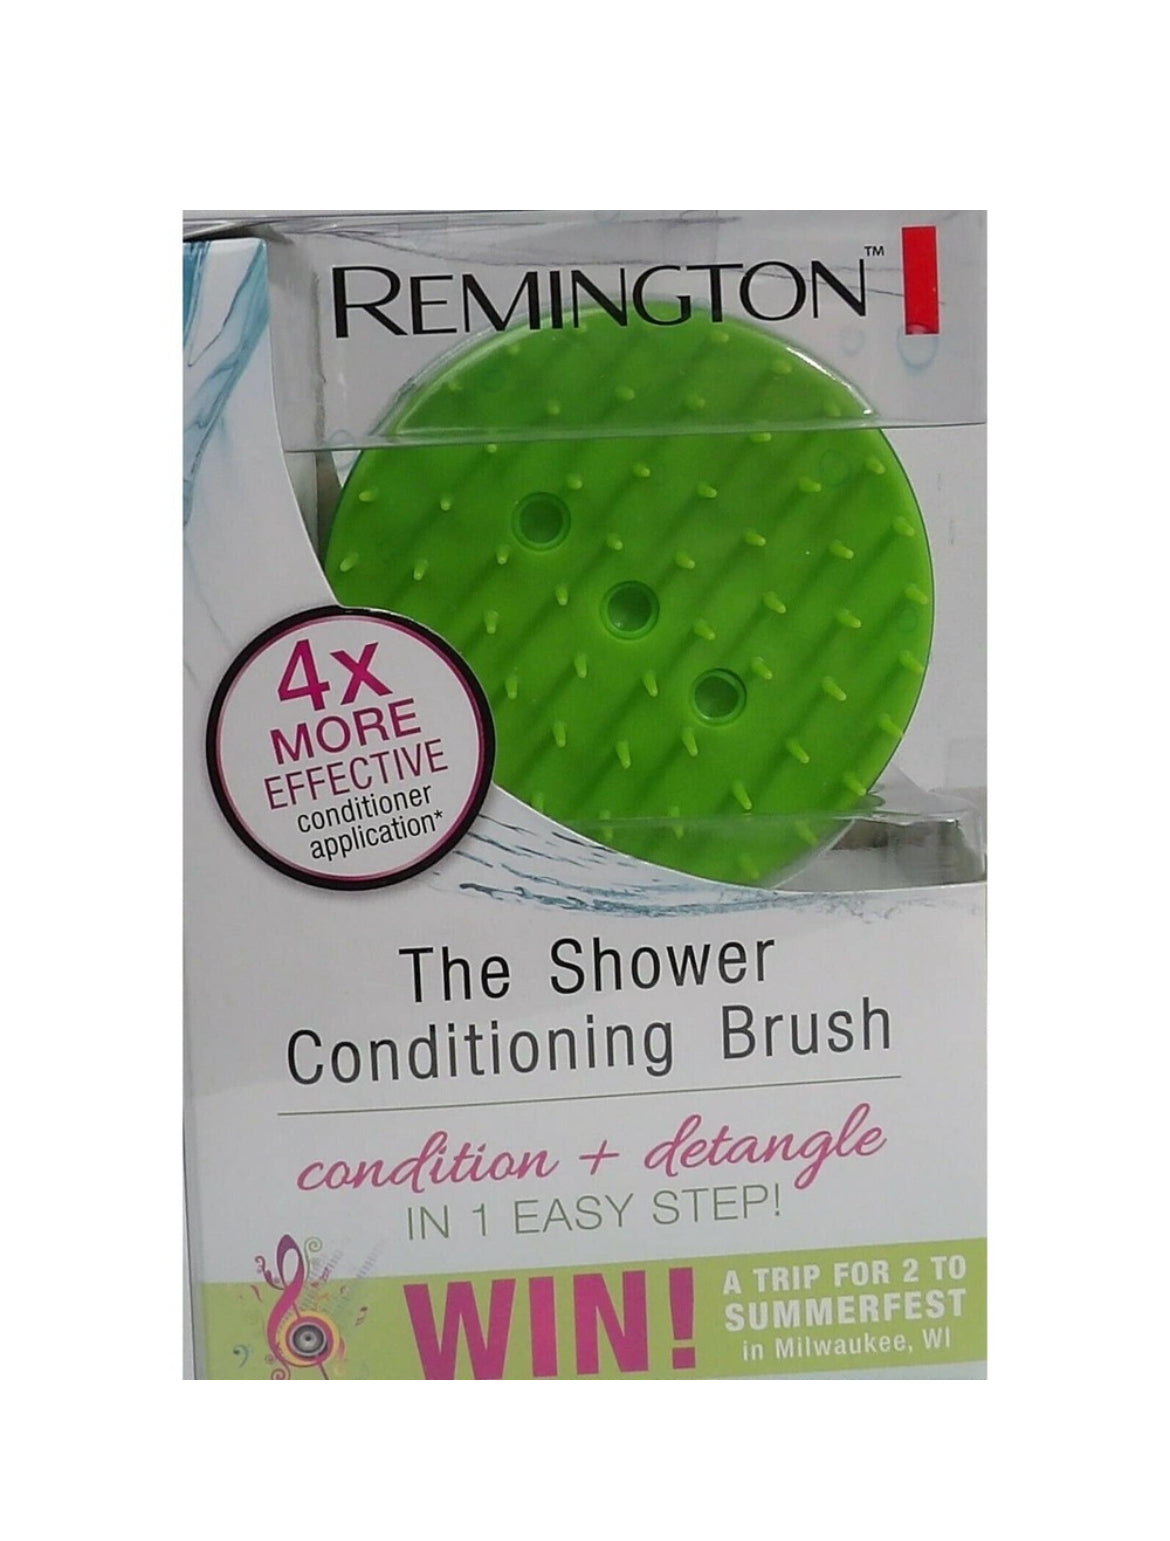 The Shower Conditioning Brush